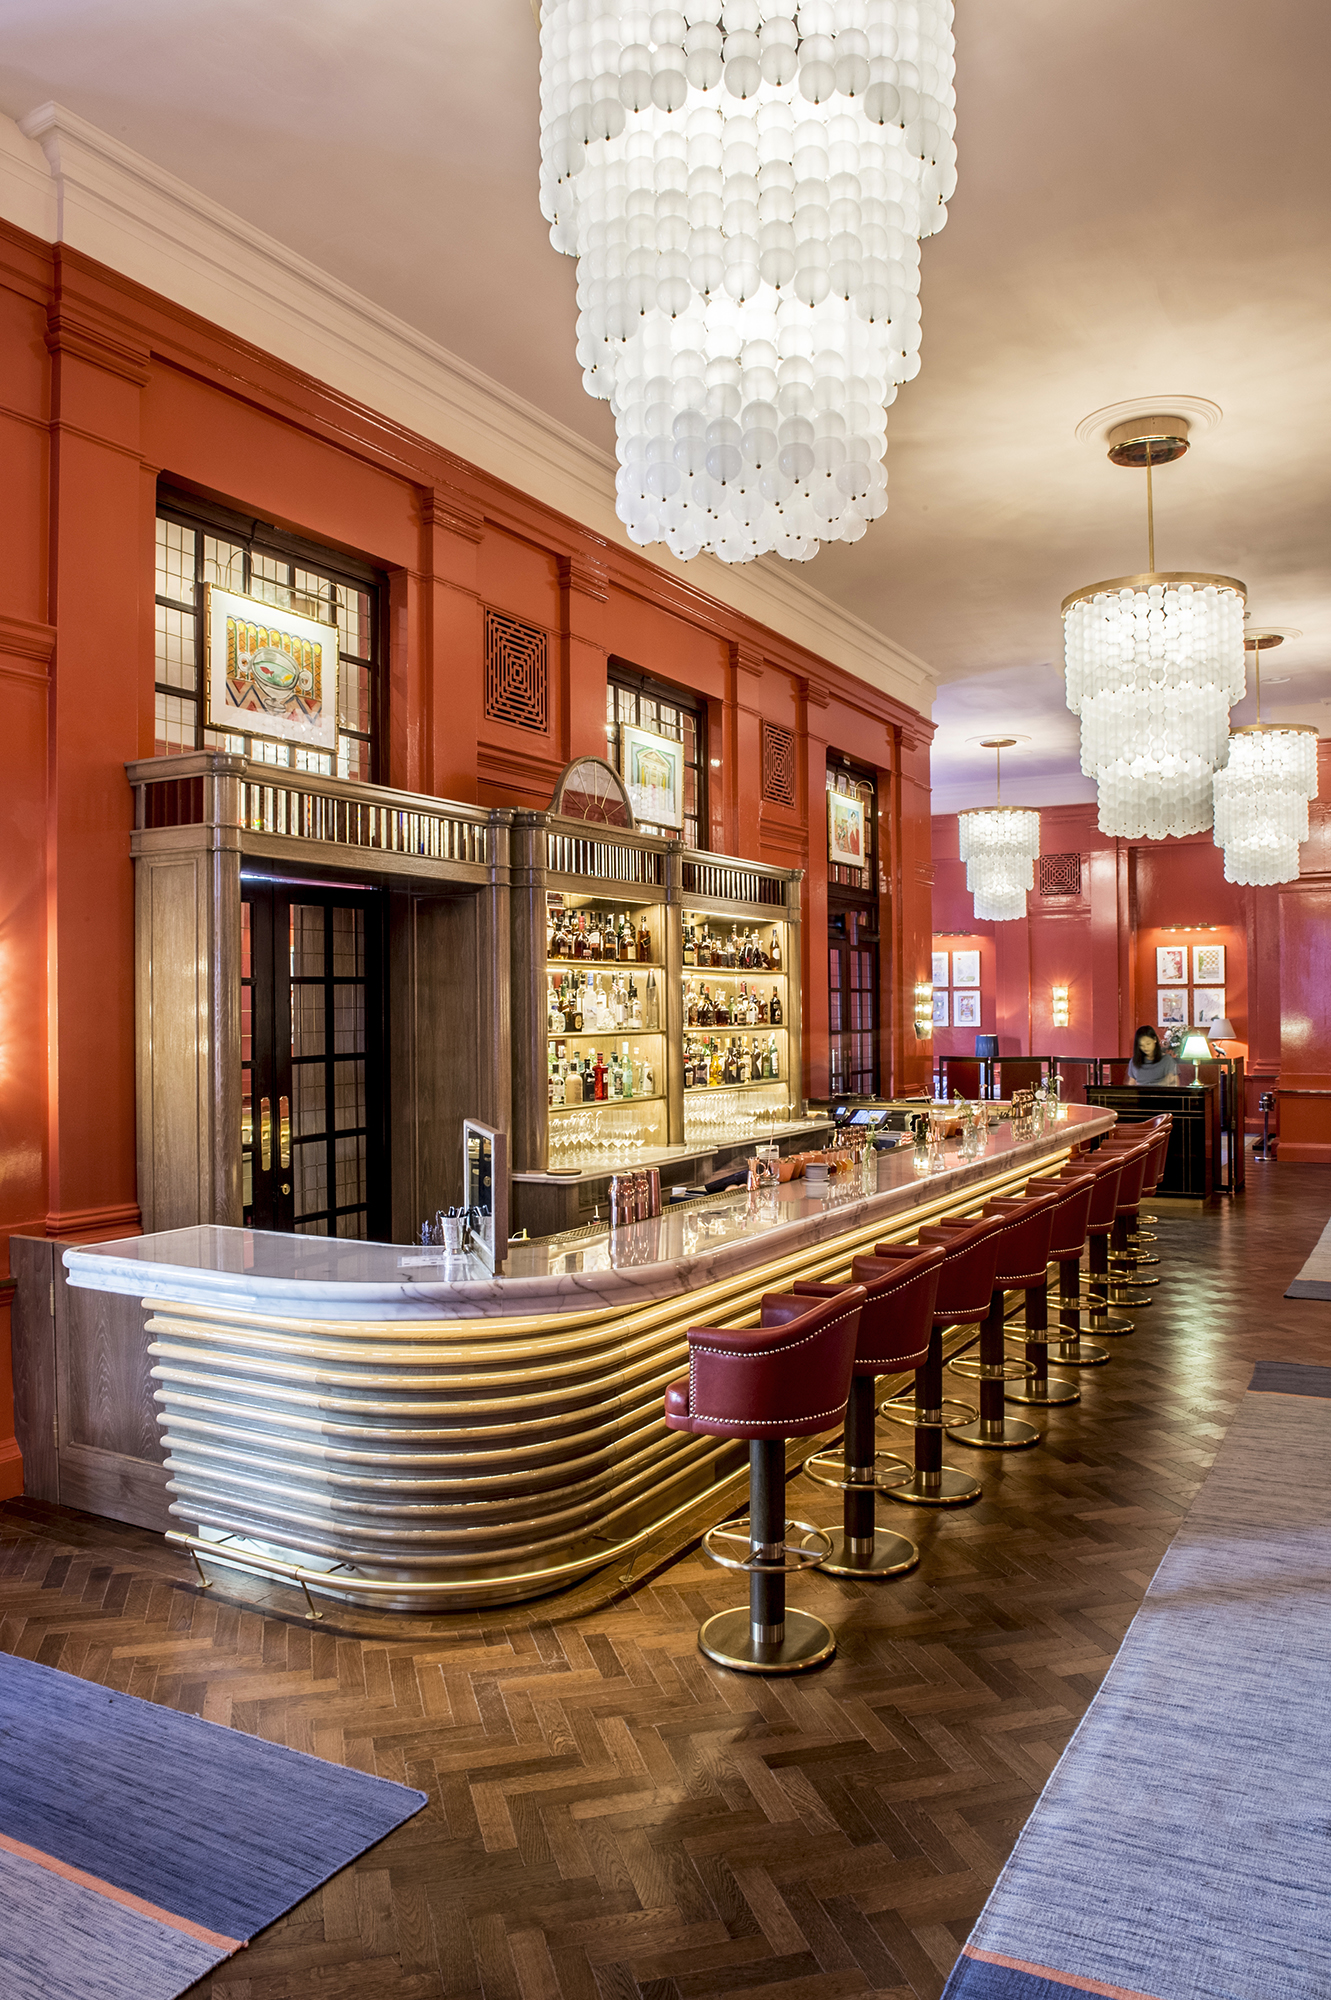 Cocktails and opulence at The Coral Room at The Bloomsbury Hotel